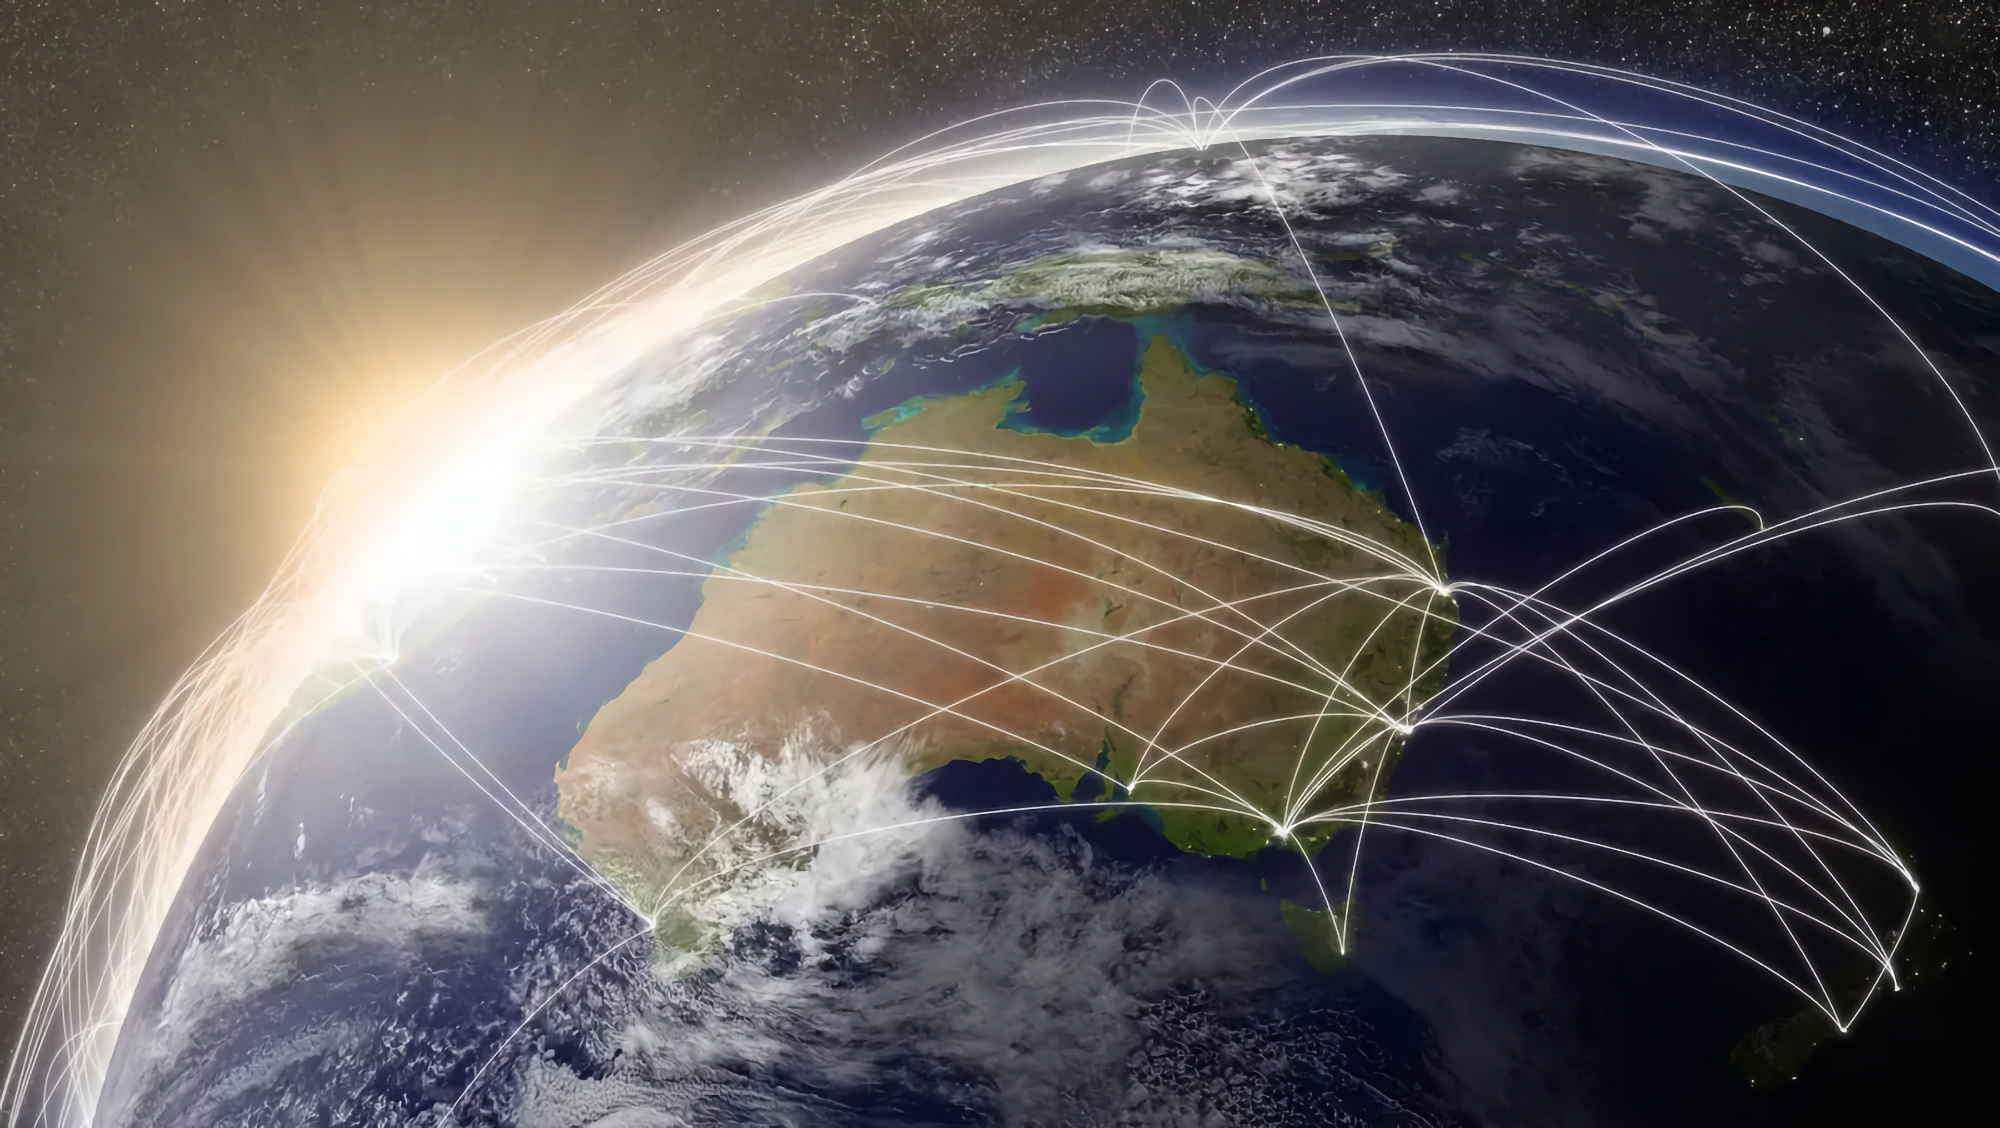 4G and 5G only: Australia will completely shut down its 3G network this year